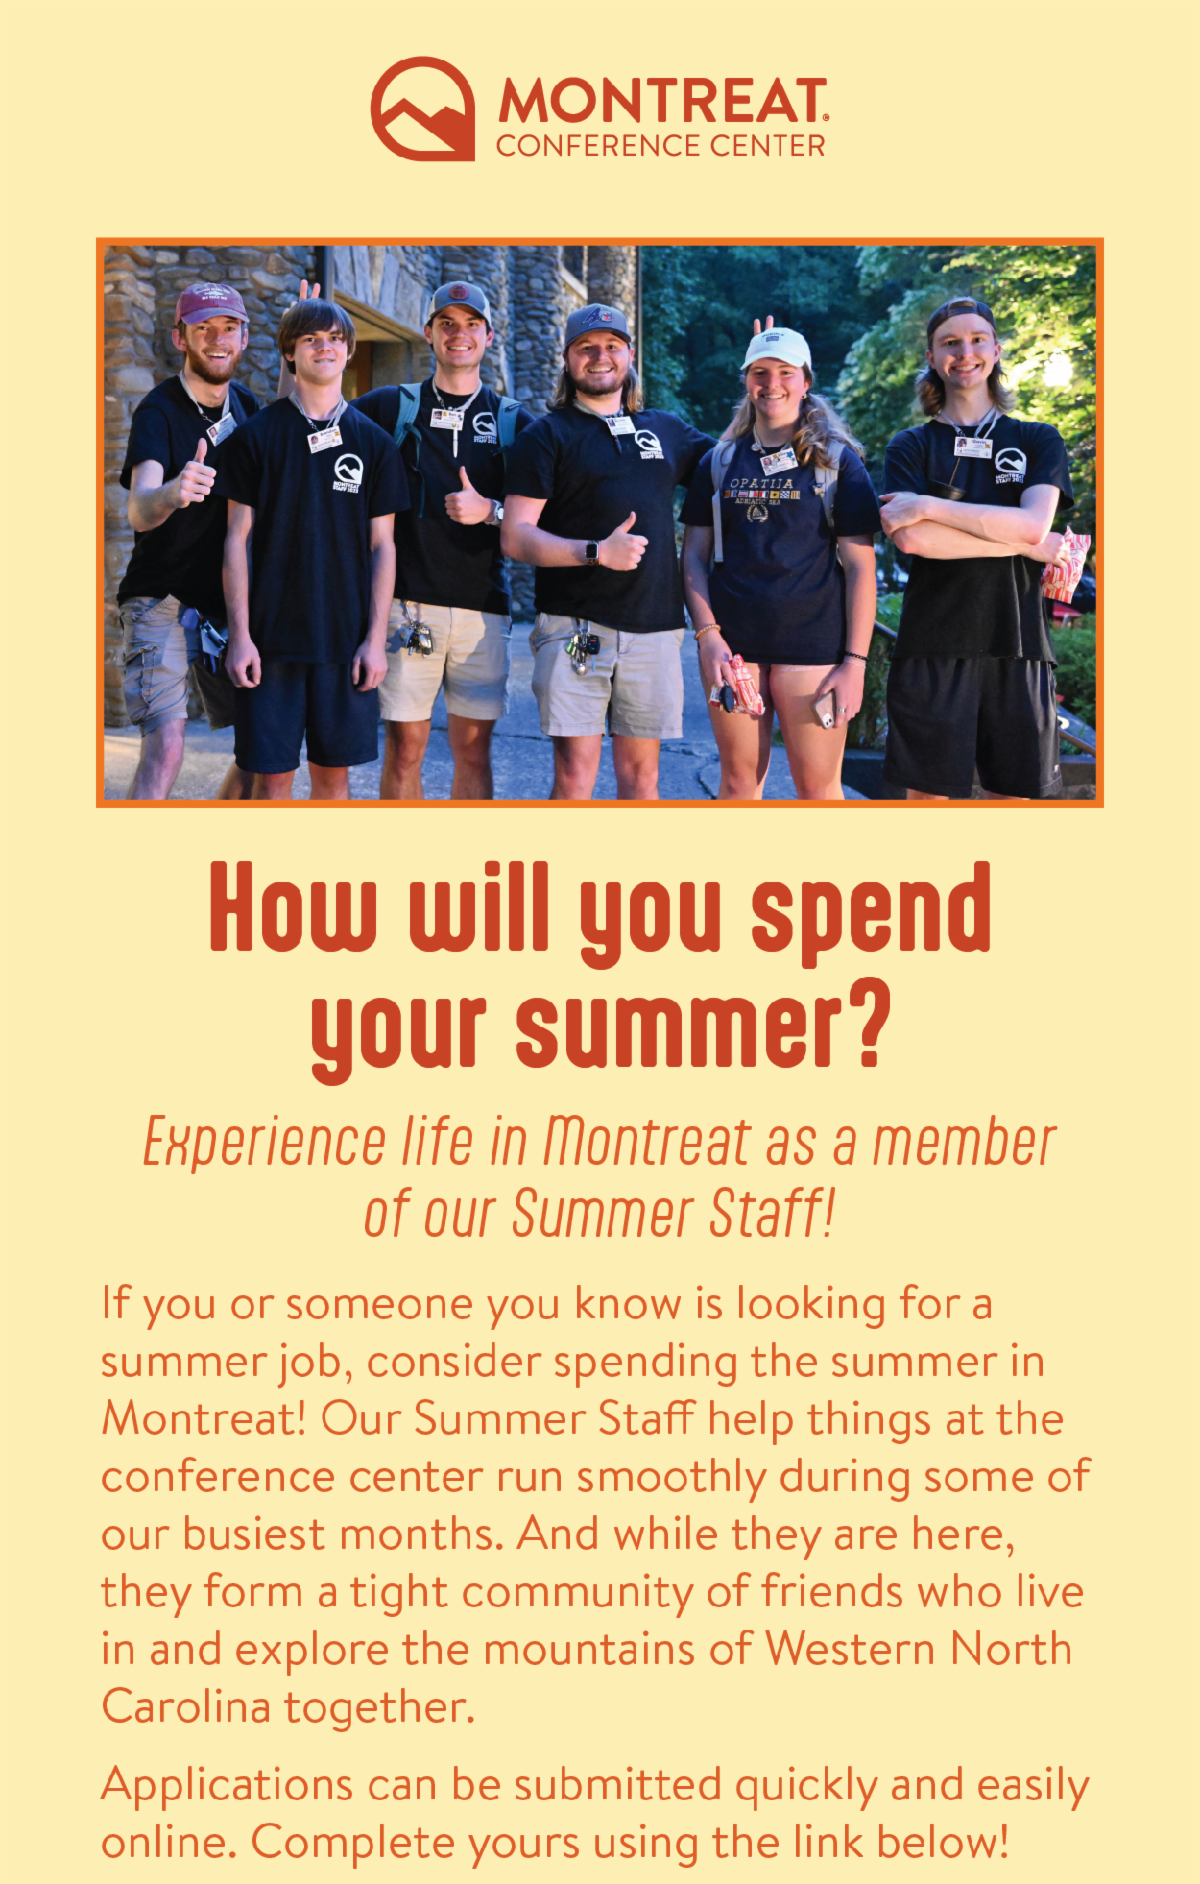 How will you spend your summer? Experience life in Montreat as a member of our Summer Staff! - If you or someone you know is looking for a summer job, consider spending the summer in Montreat! Our Summer Staff help things at the conference center run smoothly during some of our busiest months. And while they are here, they form a tight community of friends who live in and explore the mountains of Western North Carolina together. Applications can be submitted quickly and easily online. Complete yours using the link below!